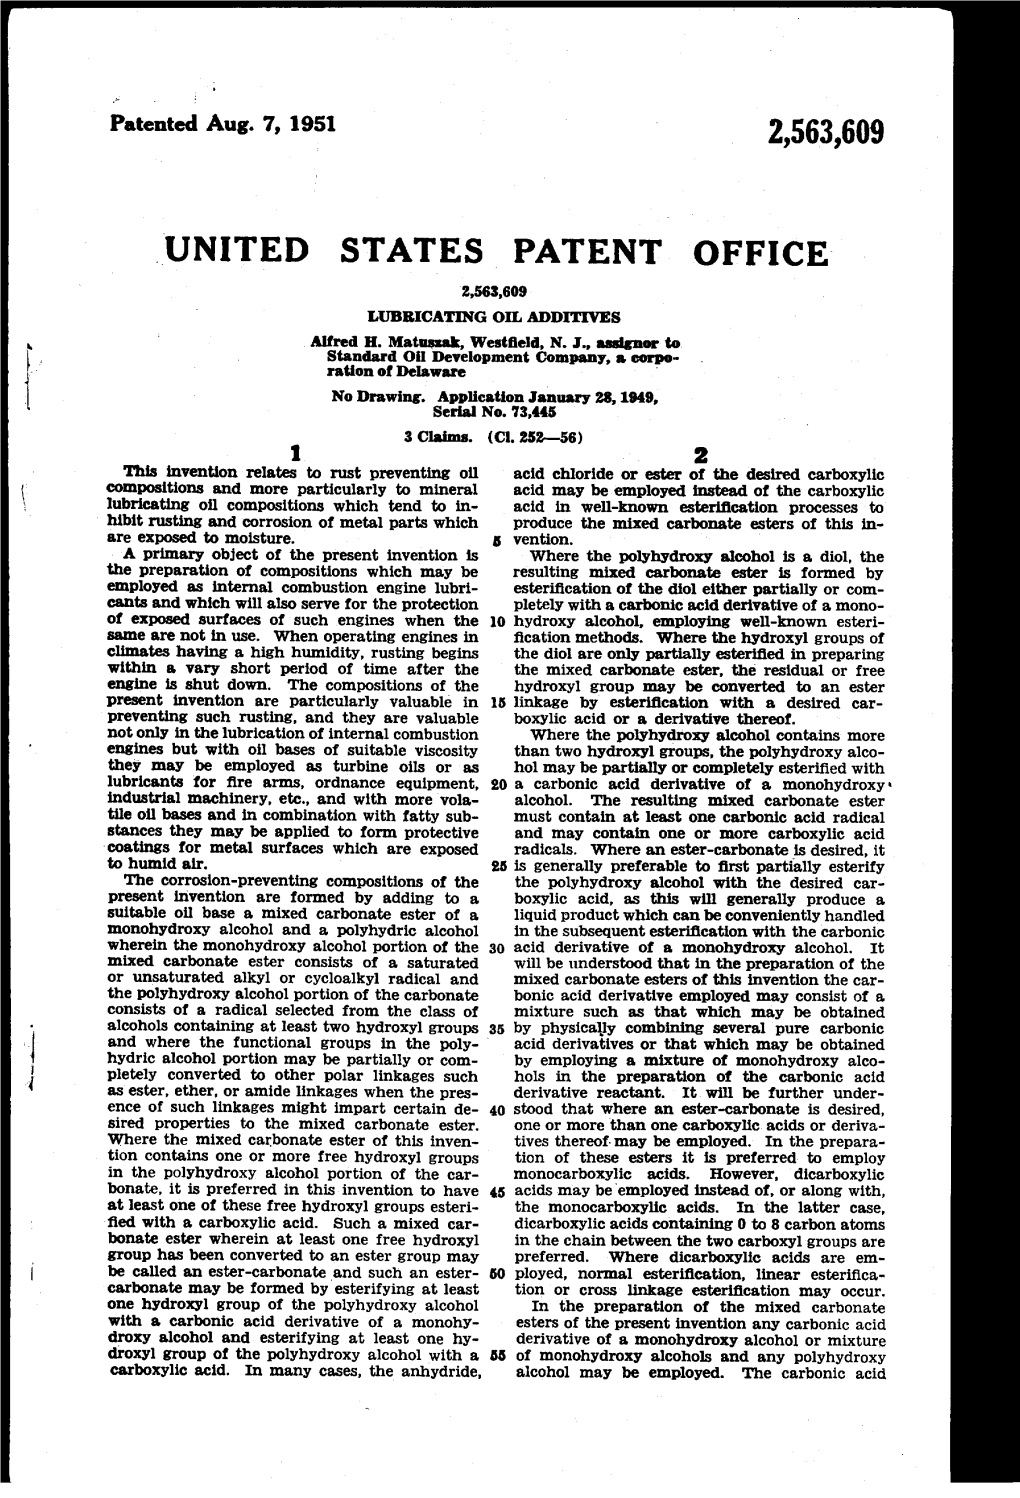 United States' Patent Office